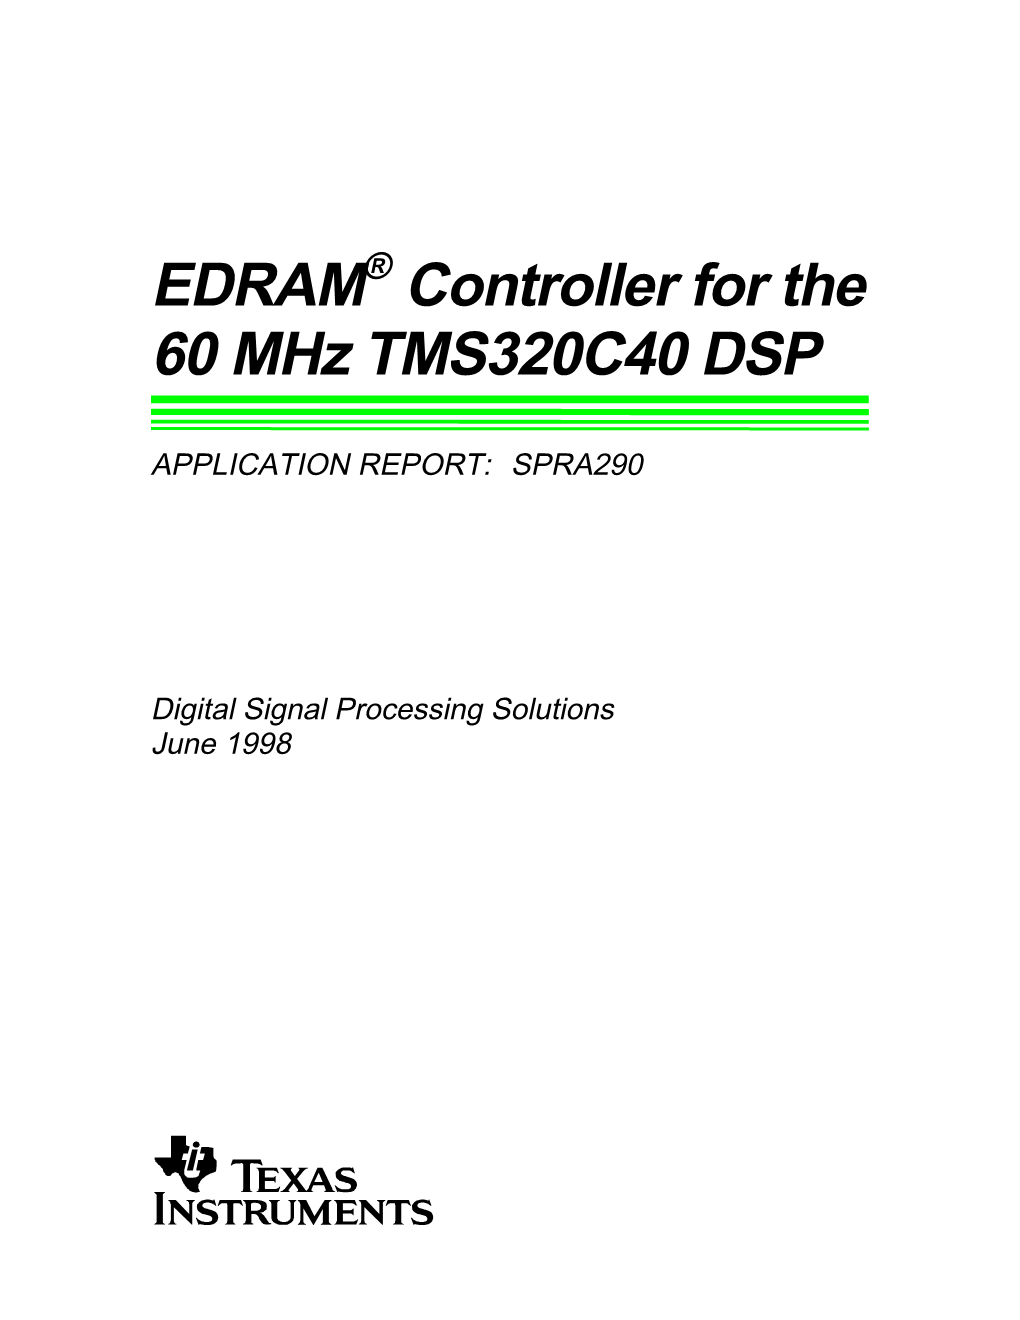 EDRAM Controller for the 60Mhz TMS320C40